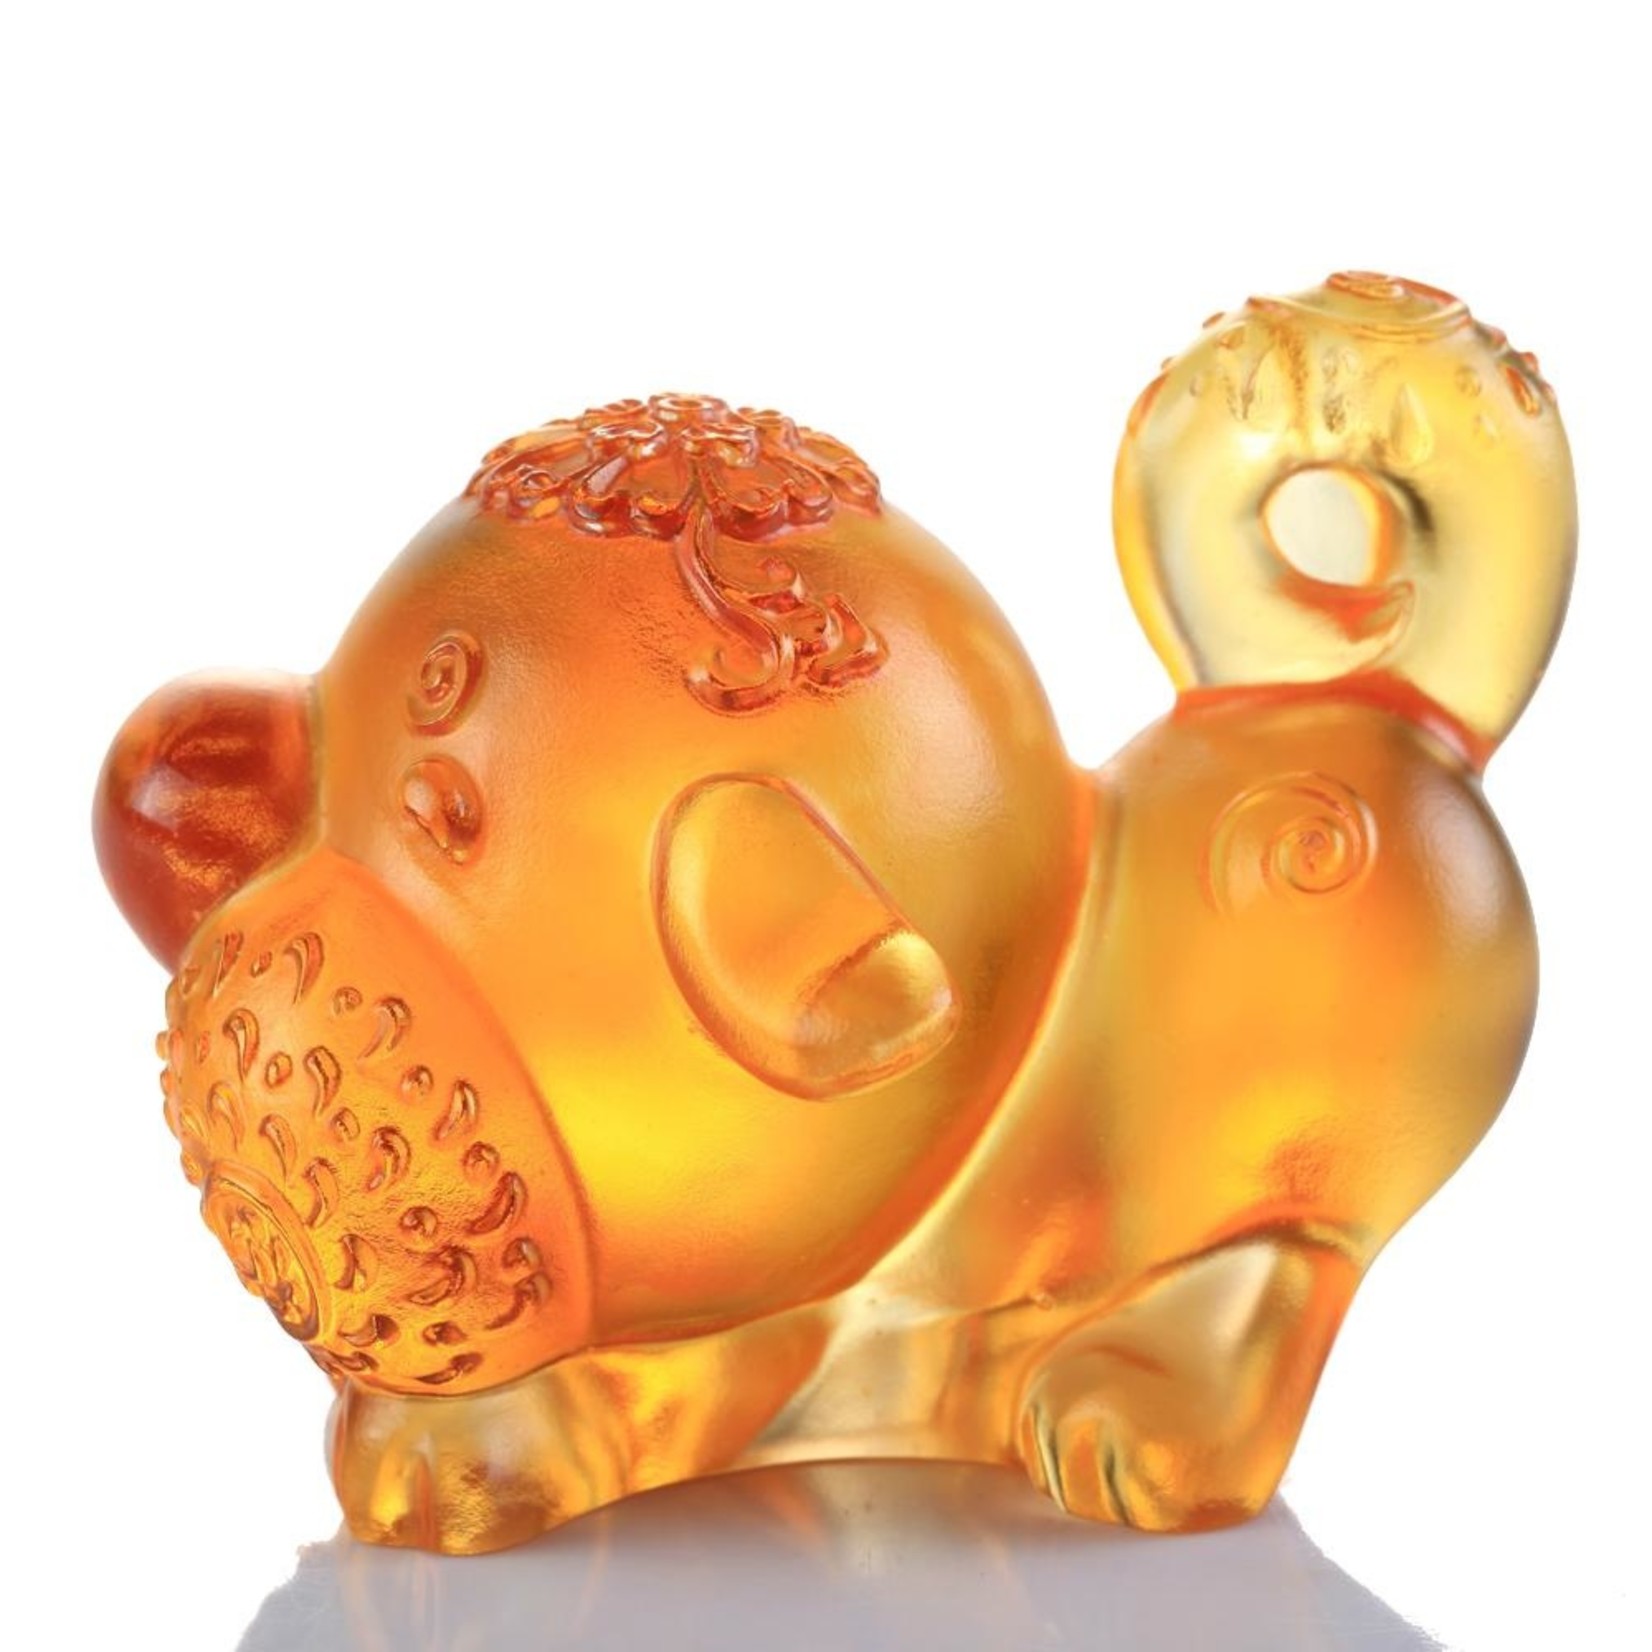 LIULI Crystal Art Crystal Year of the Dog "Prosperity Comes Along" Chinese Zodiac Figurine in Dark Amber/Light Amber (Limited Edition)